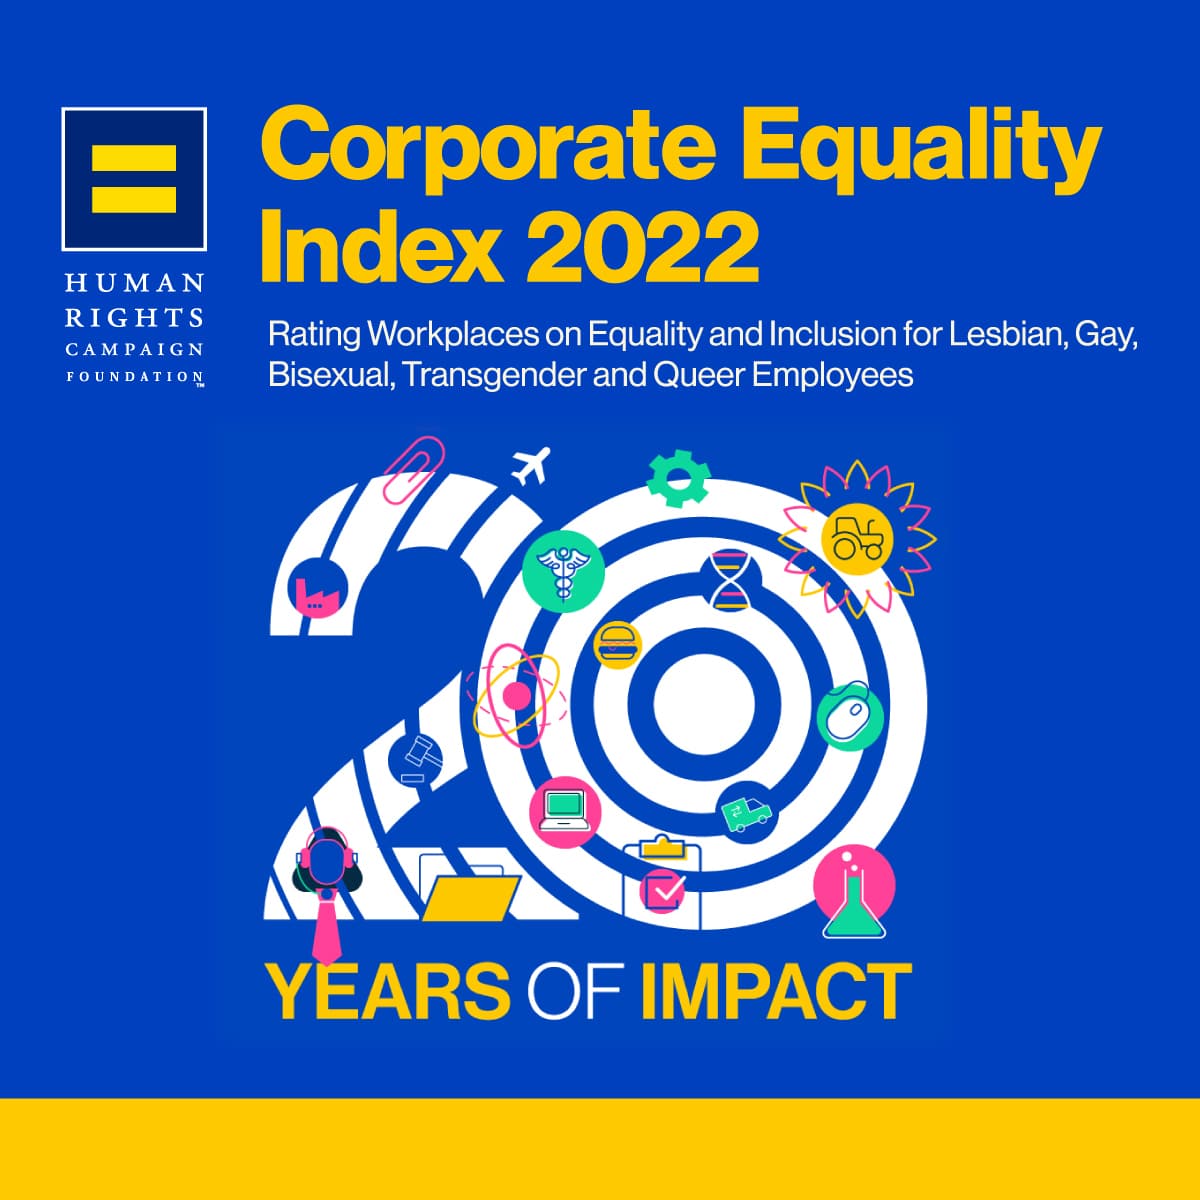 Rural Sourcing Among Top LGBTQ-Friendly Employers in Corporate Equality Index